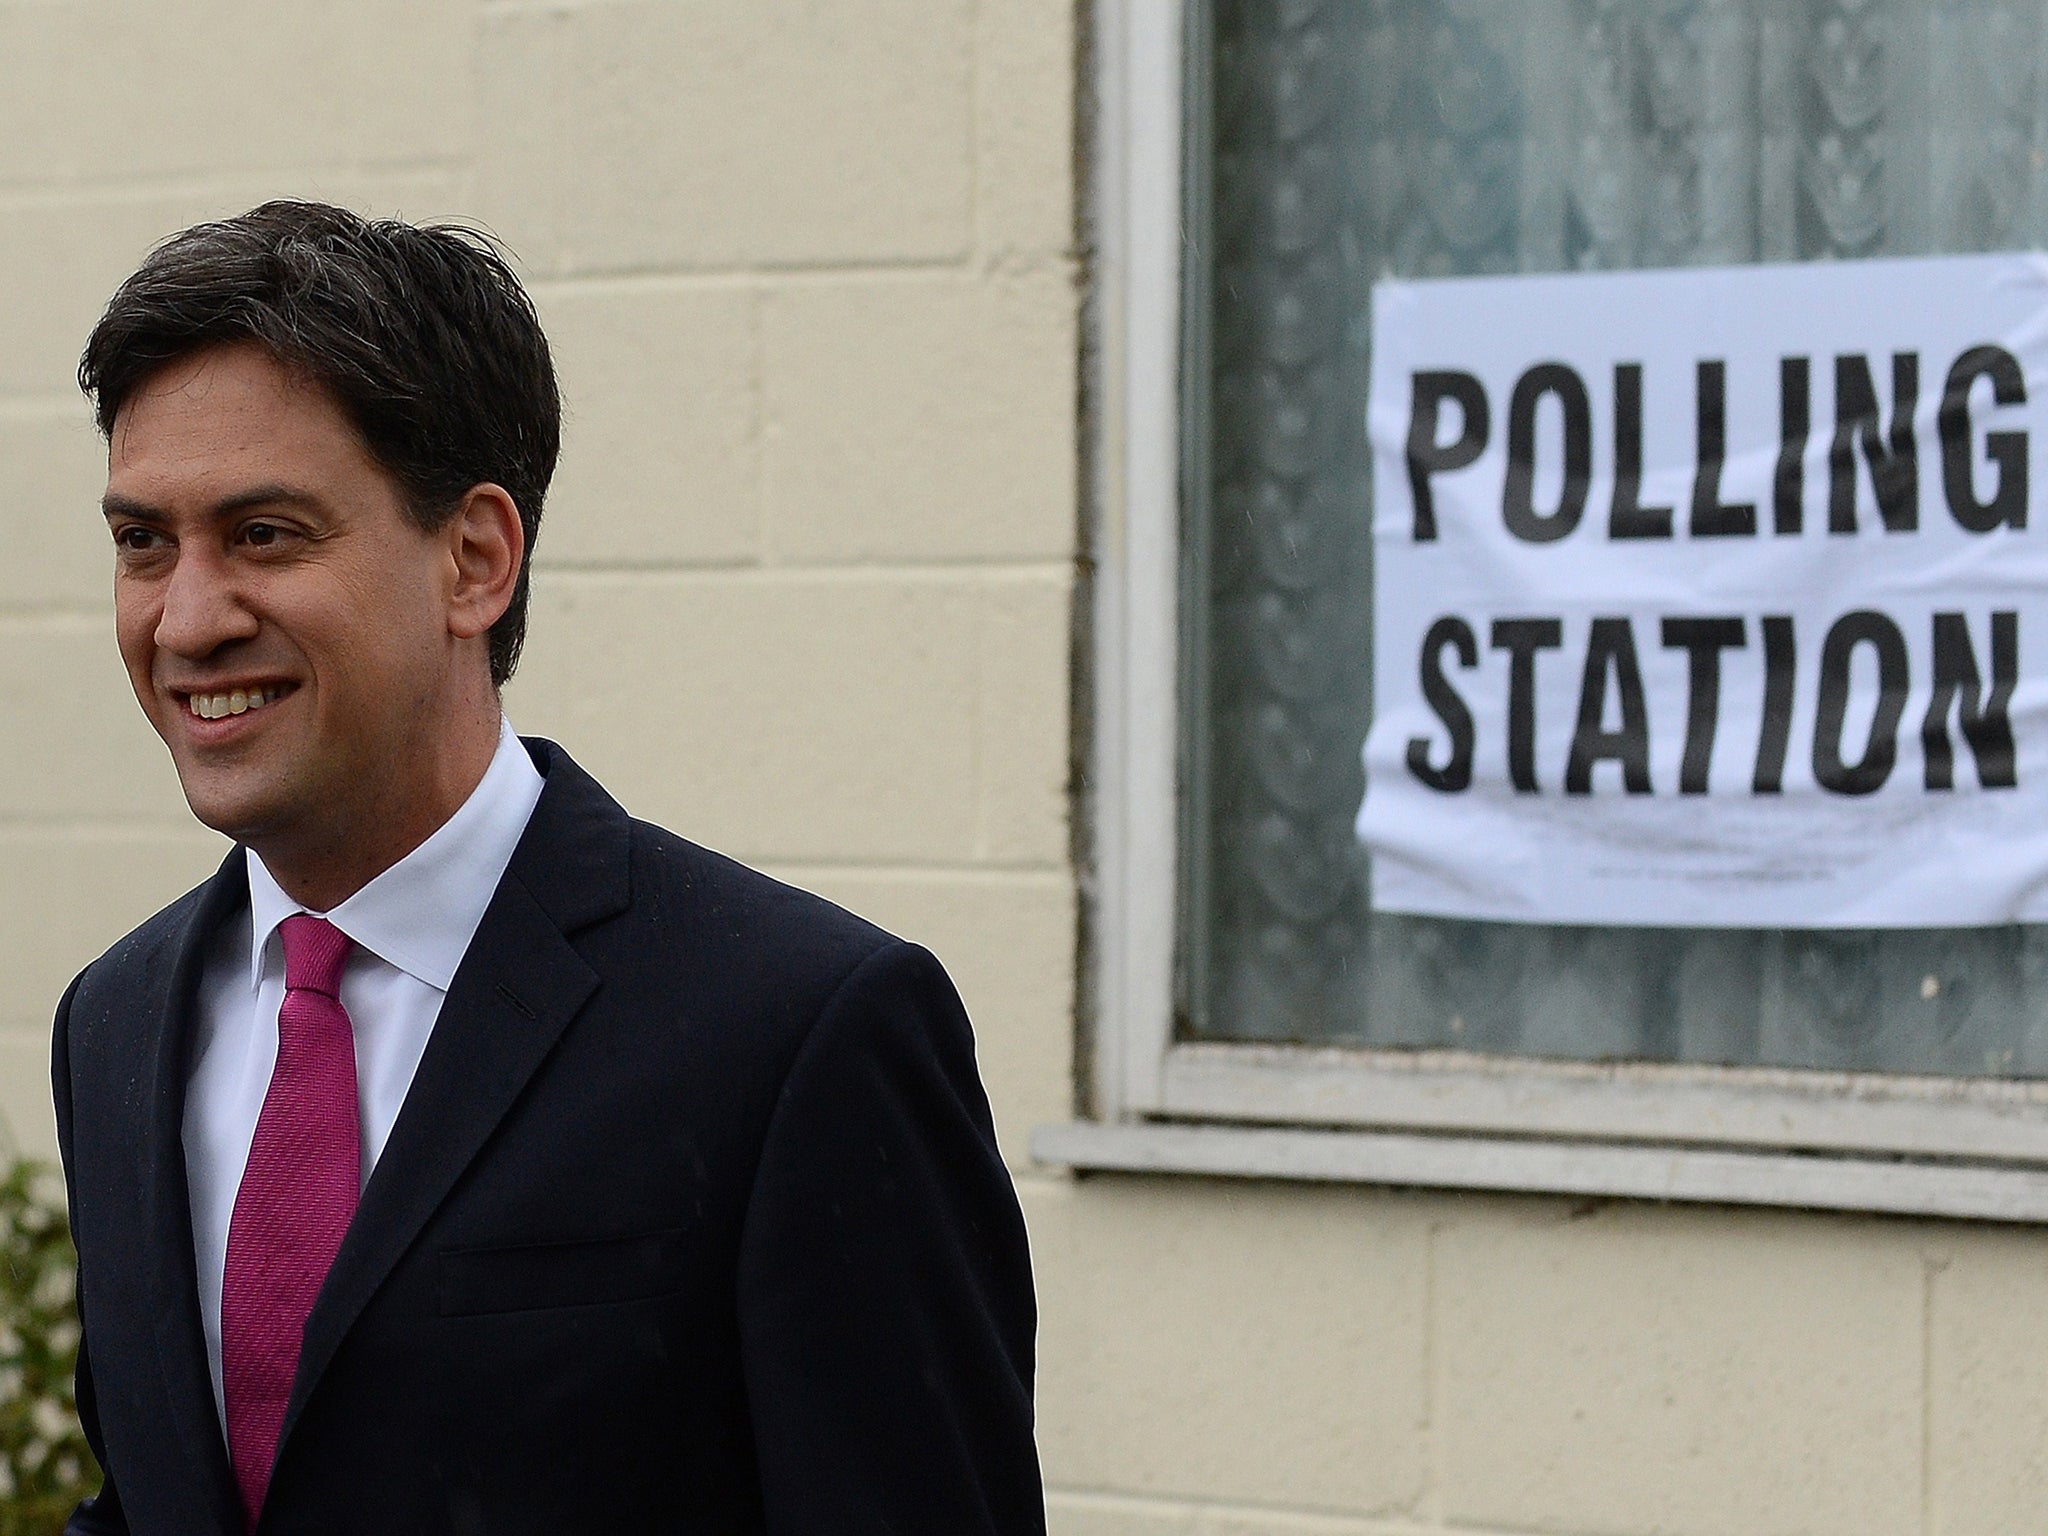 Ed Miliband's old primary school in Yorkshire will be used as polling staion and could be key come election day